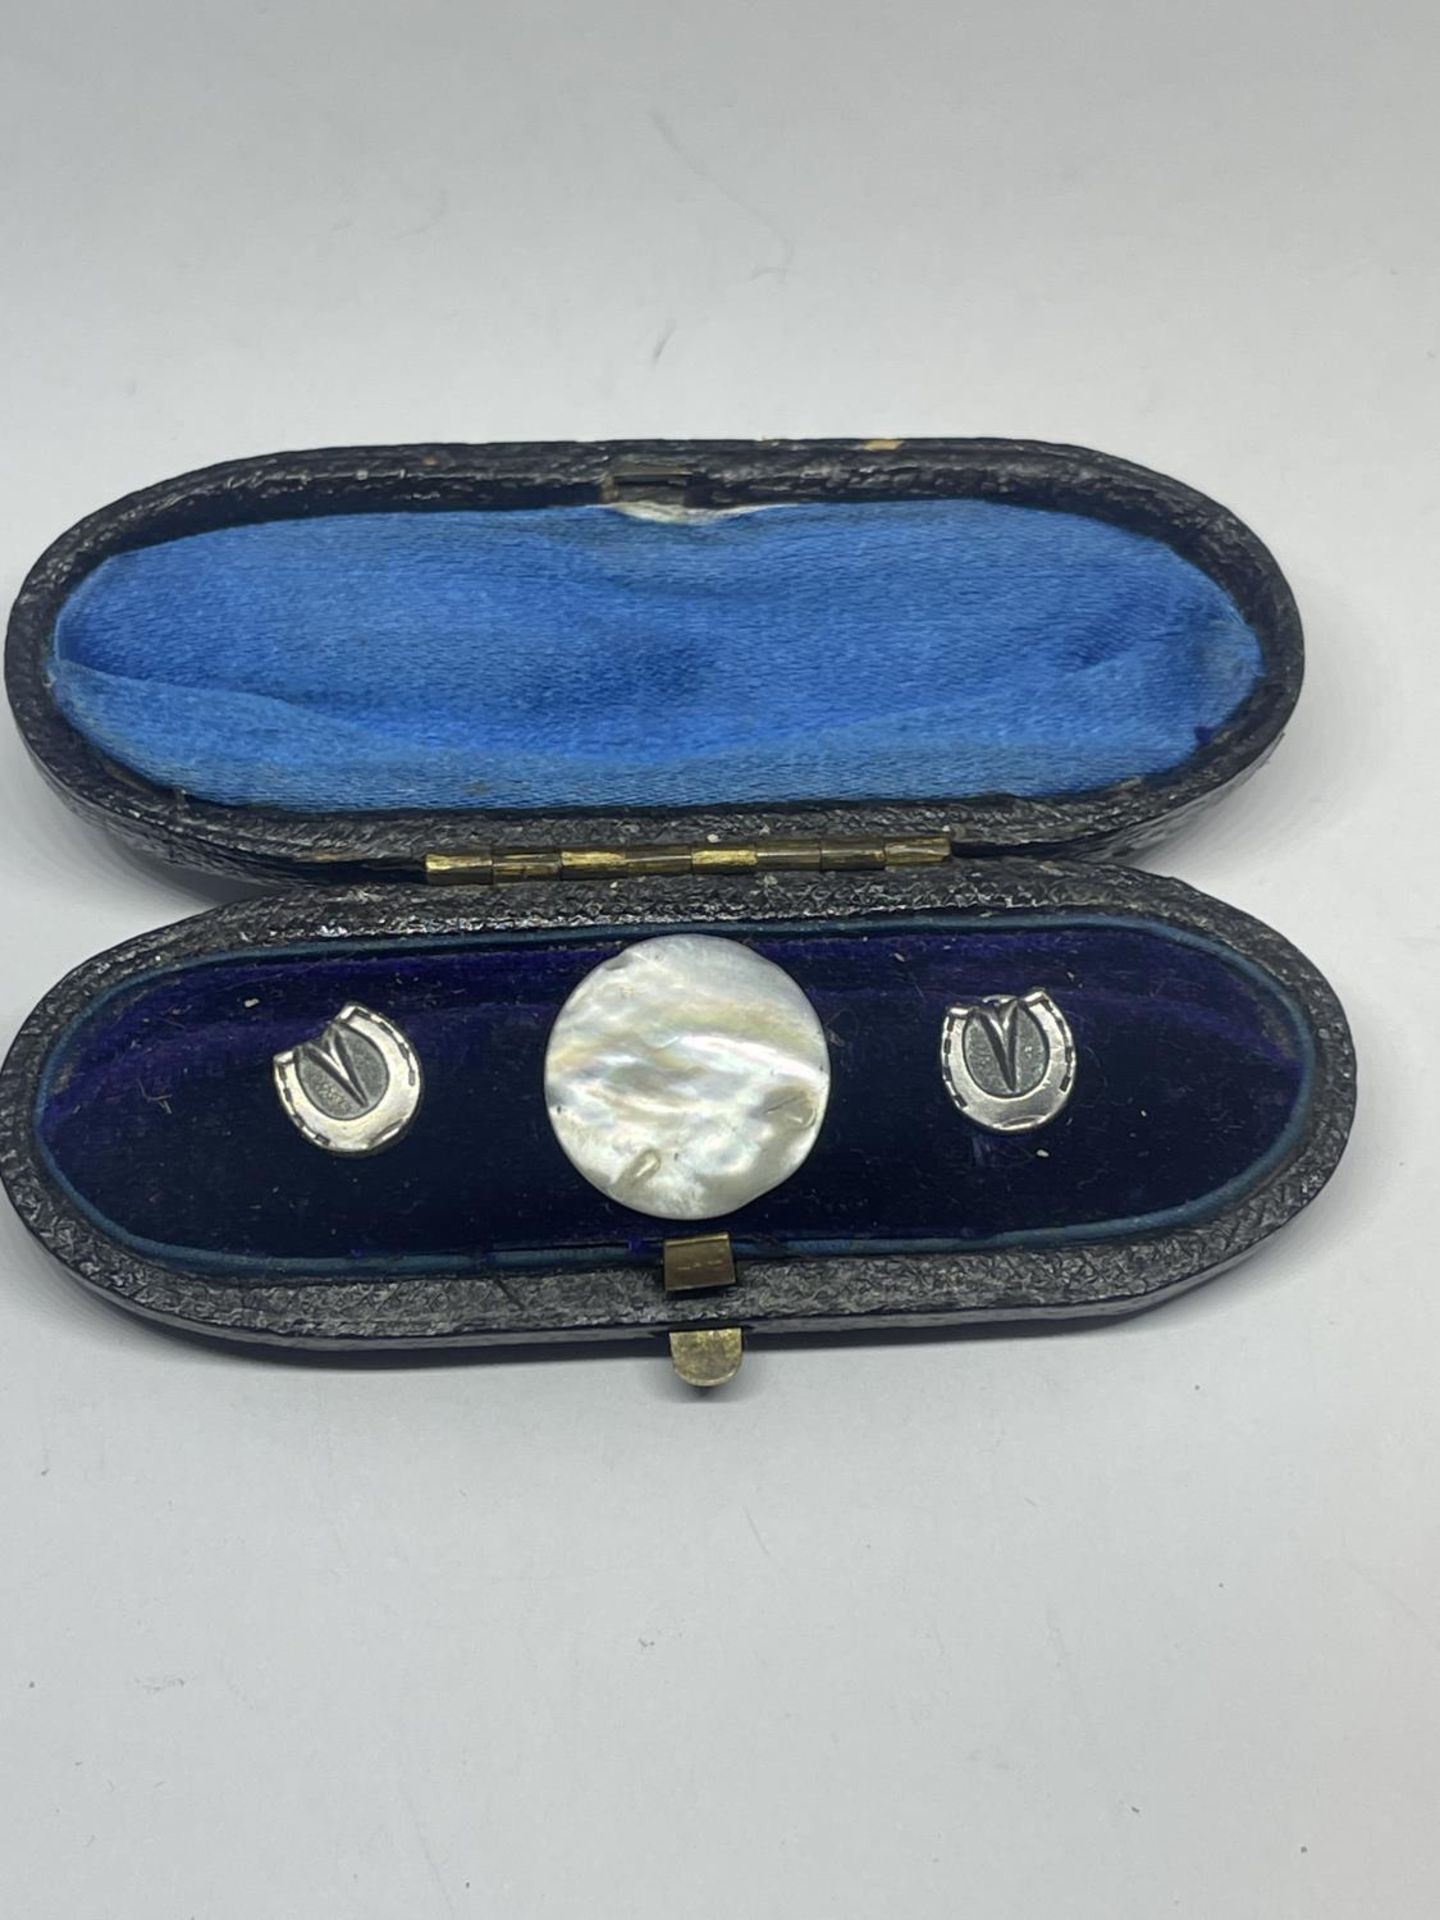 A VINTAGE BOXED SET OF THREE COLLAR STUDS - TWO HORSESHOES AND ONE MOTHER OF PEARL